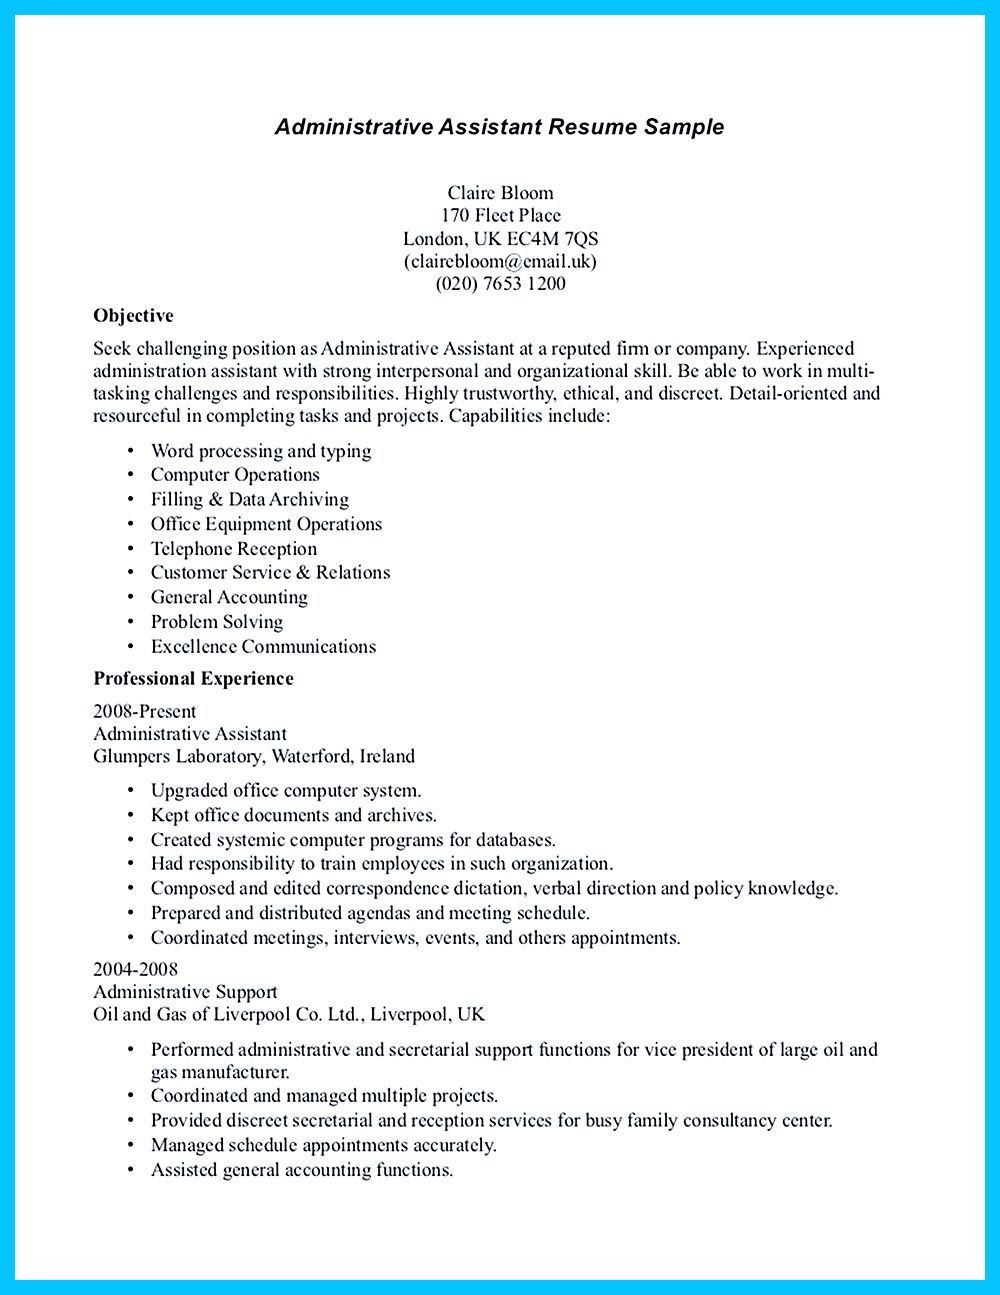 Resume Objective Samples for Administrative assistant Entry Level Administrative assistant with No Experience Cv October …